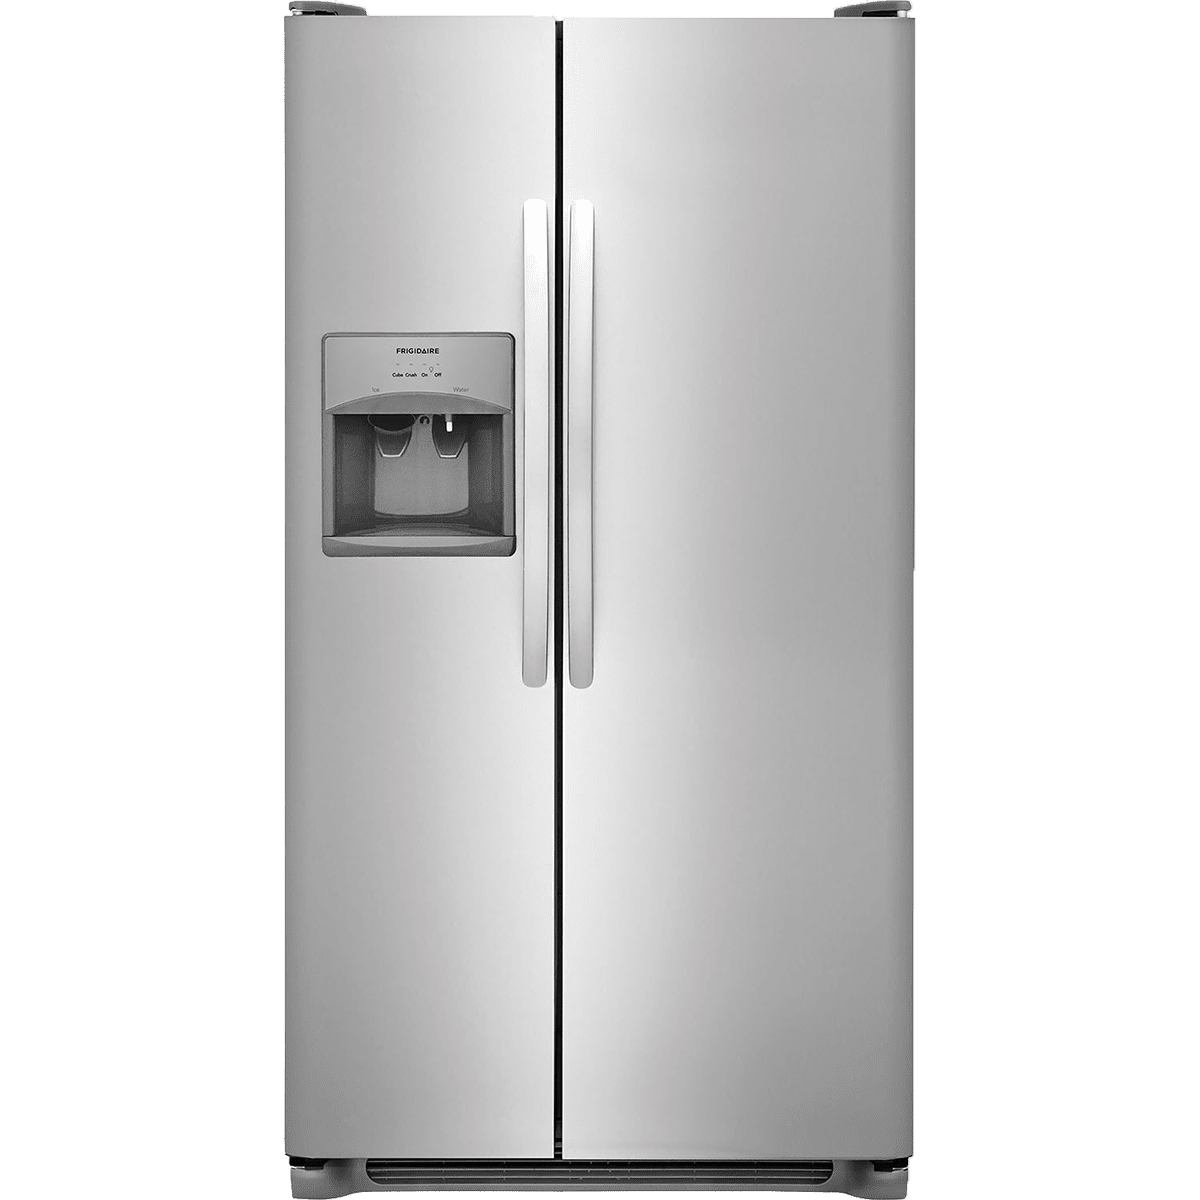 Frigidaire 25.6 Cu. Ft. Side-by-Side Refrigerator - Stainless Steel - Primary View